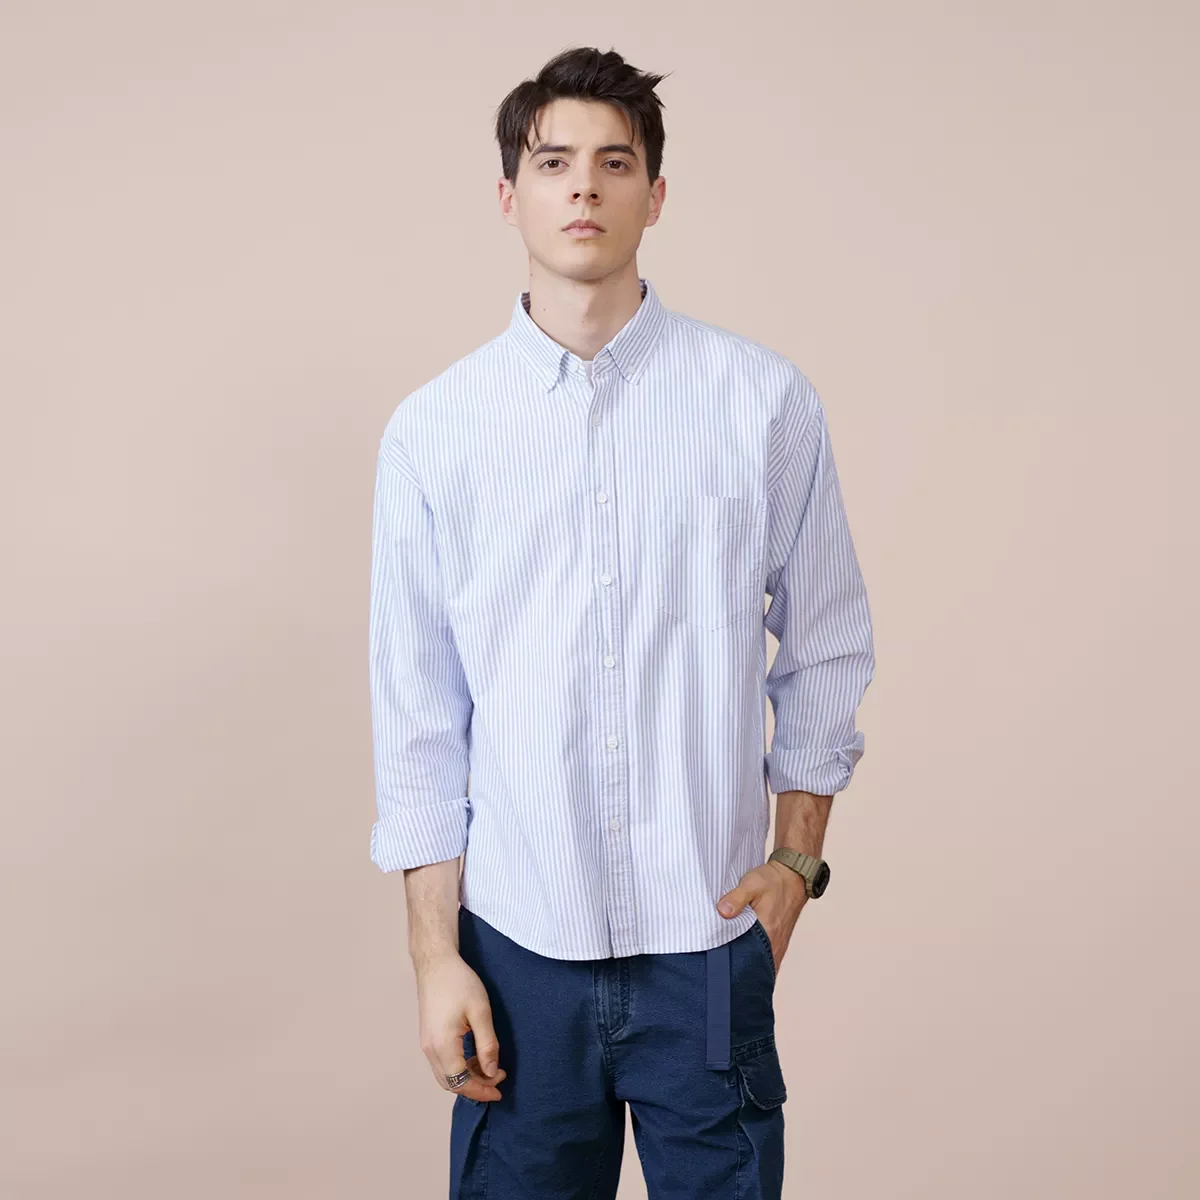 2023NEW 2022 Spring New Oxford Shirts Men Vertical Striped Classical Casual 100% Cotton  Shirt Plus Size Brand Clothing SK130344